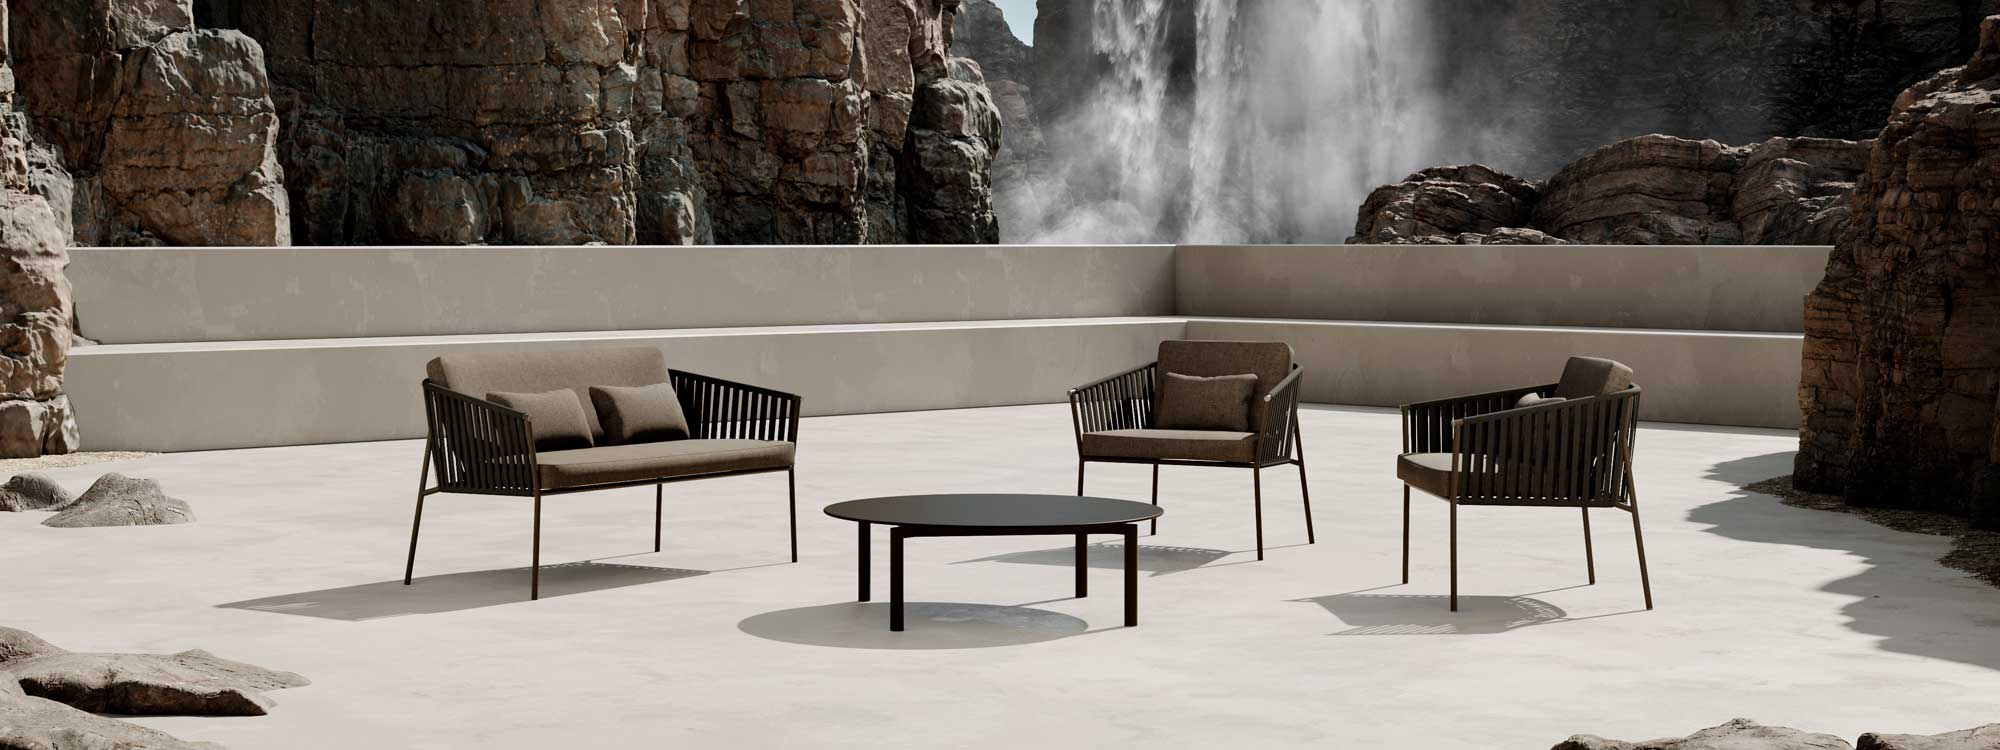 Image of Oiside Twist garden sofa, lounge chairs and low table on a sunny concrete terrace, with rockface and water vapor in the background